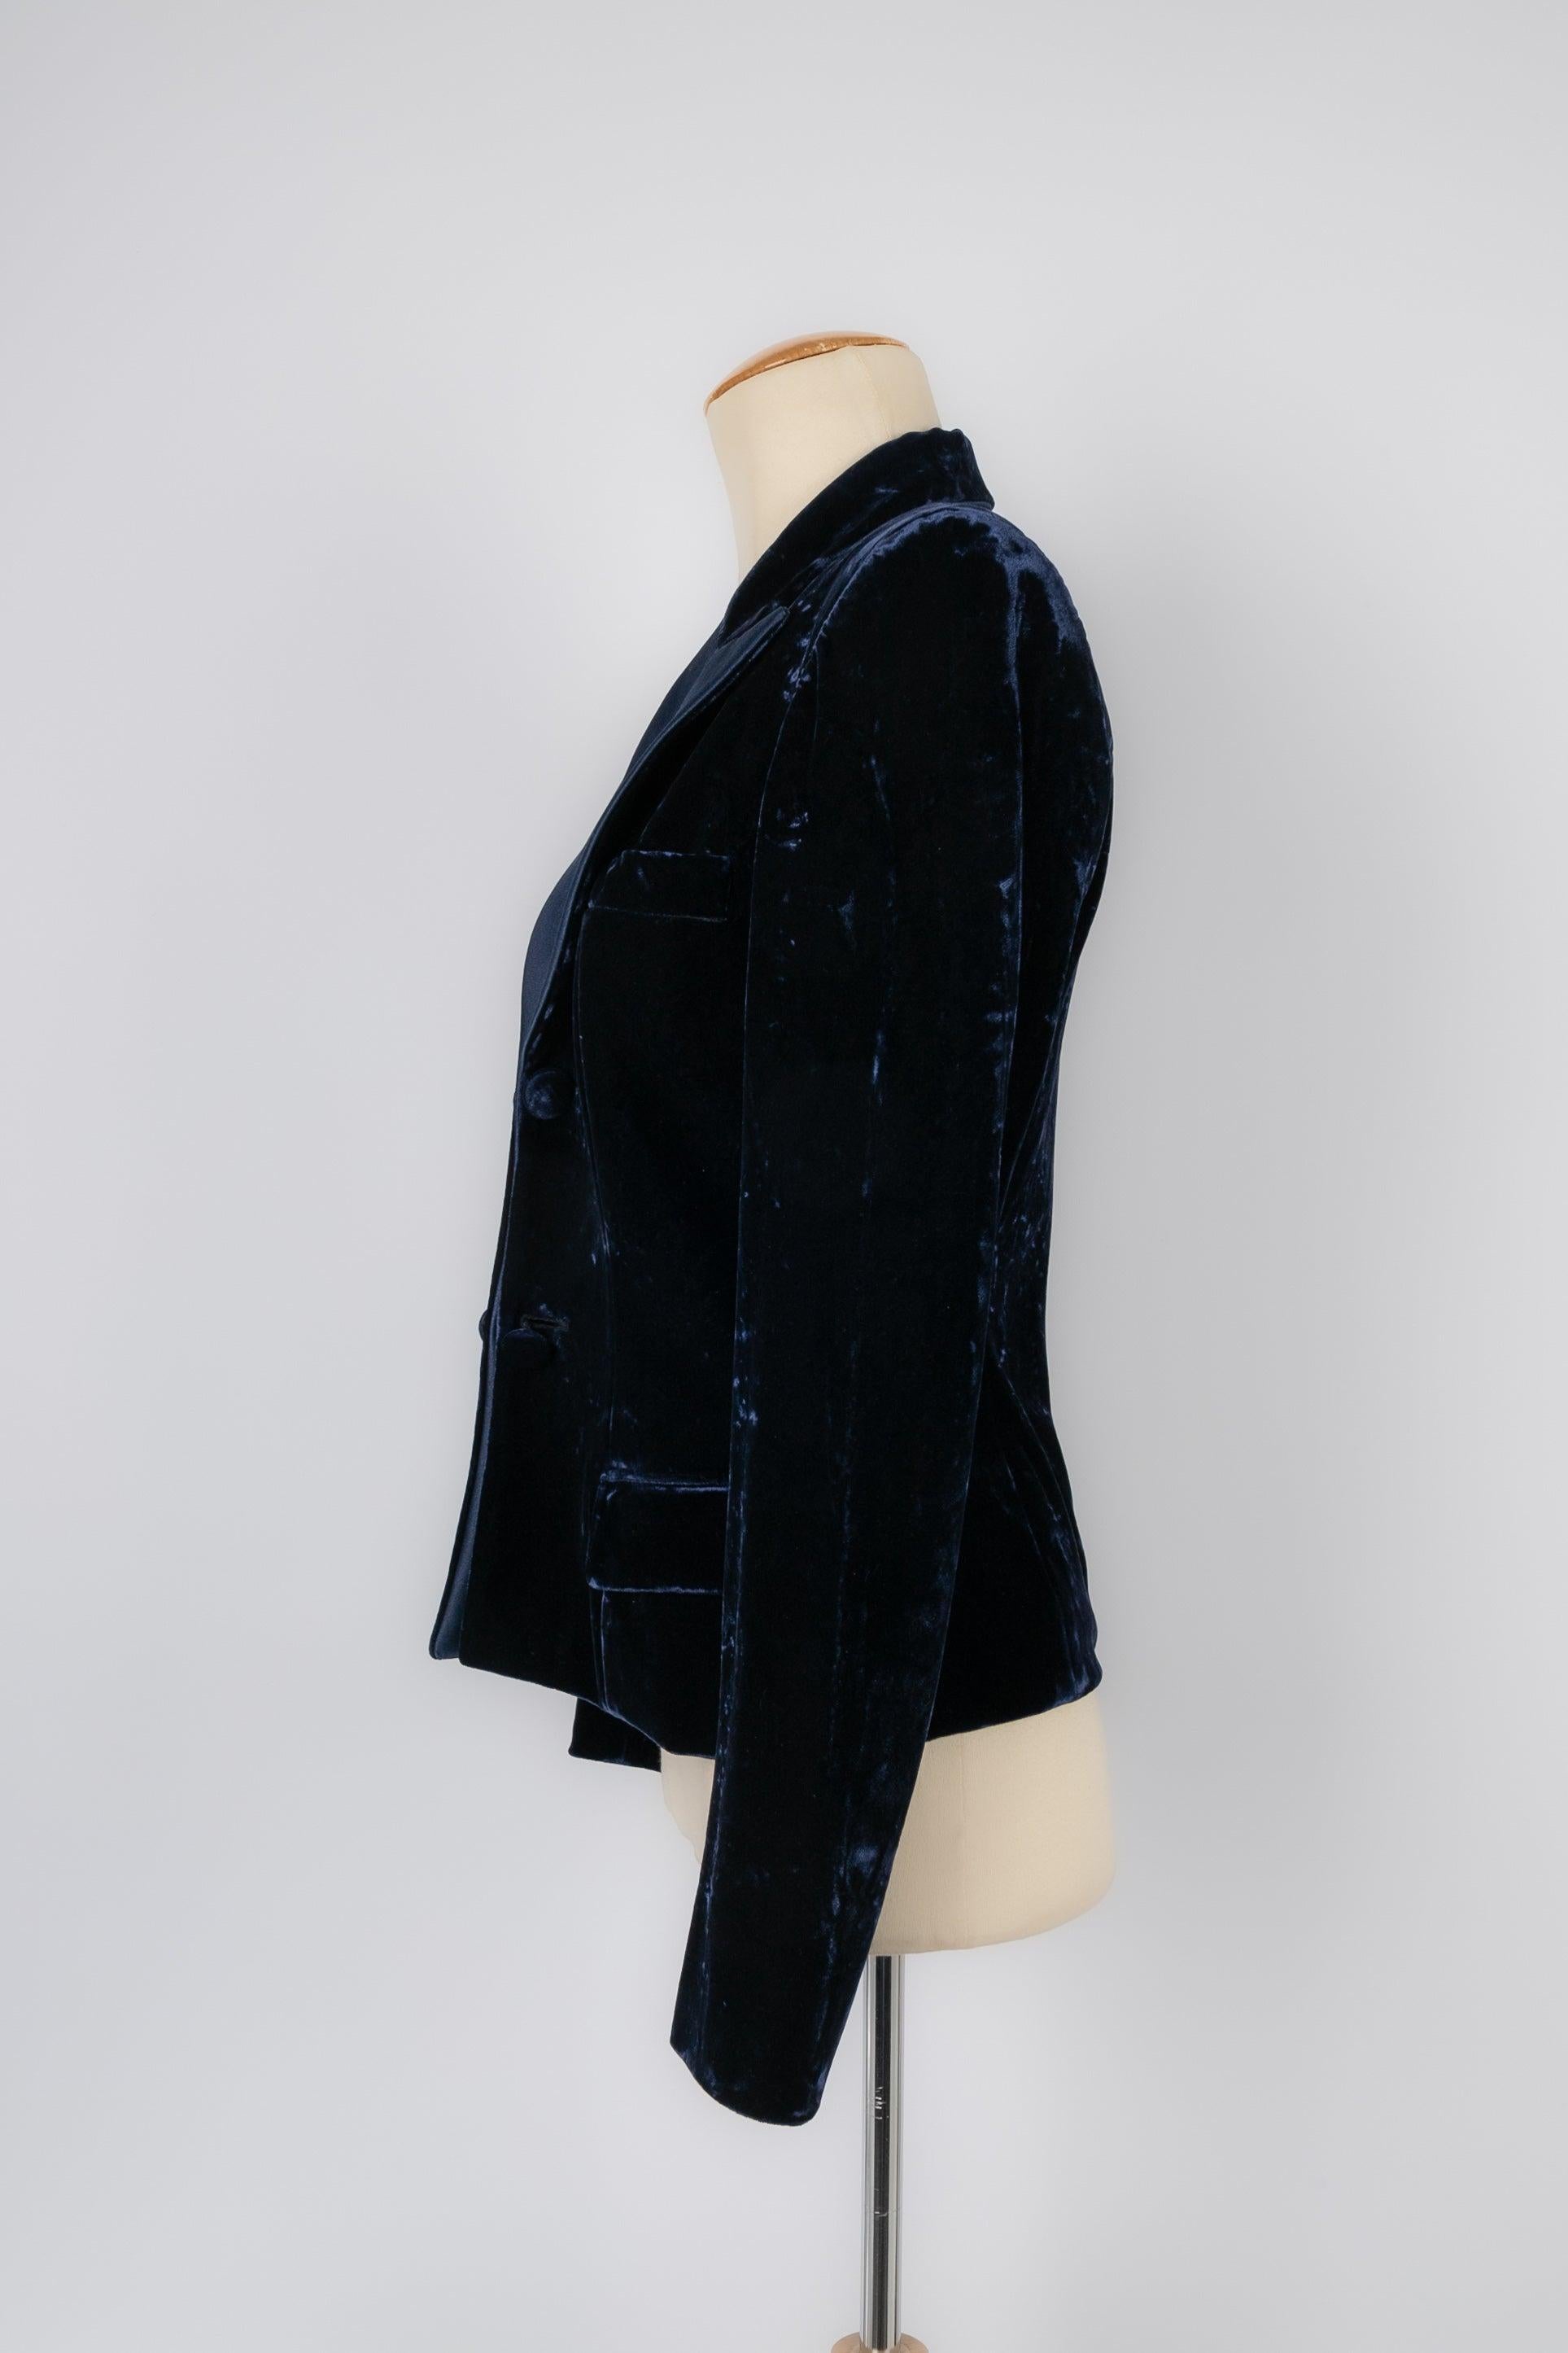 Yves Saint Laurent - (Made in France) Dark-blue velvet jacket with a satin collar reverse. No size nor composition label, it fits a 36FR.

Additional information:
Condition: Very good condition
Dimensions: Shoulder width: 40 cm - Sleeve length: 57